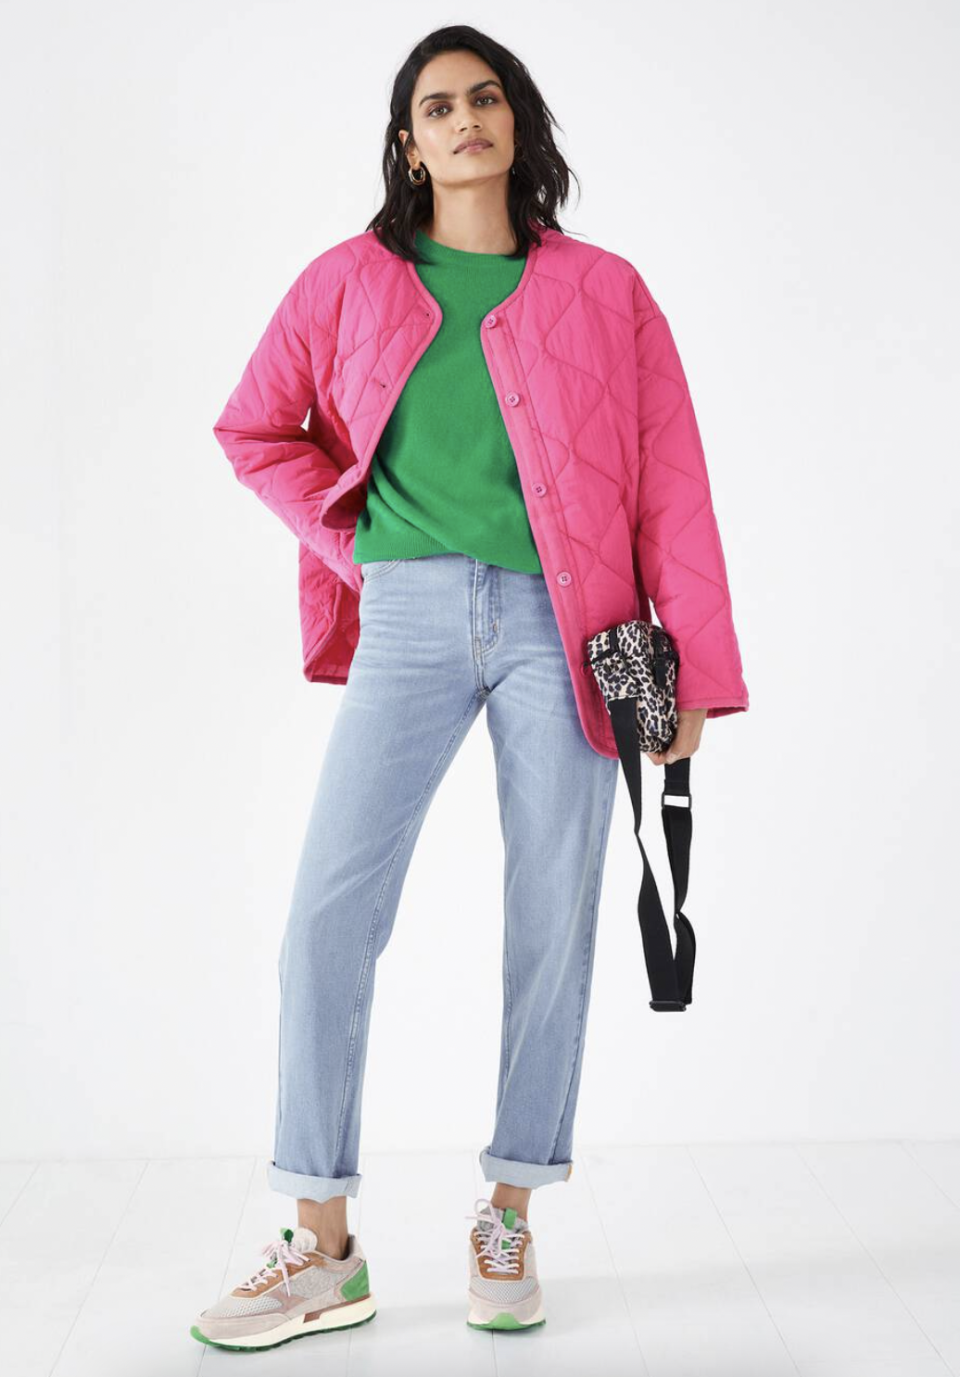 Lightweight padding and a pop of colour. We're here for it. (Hush)